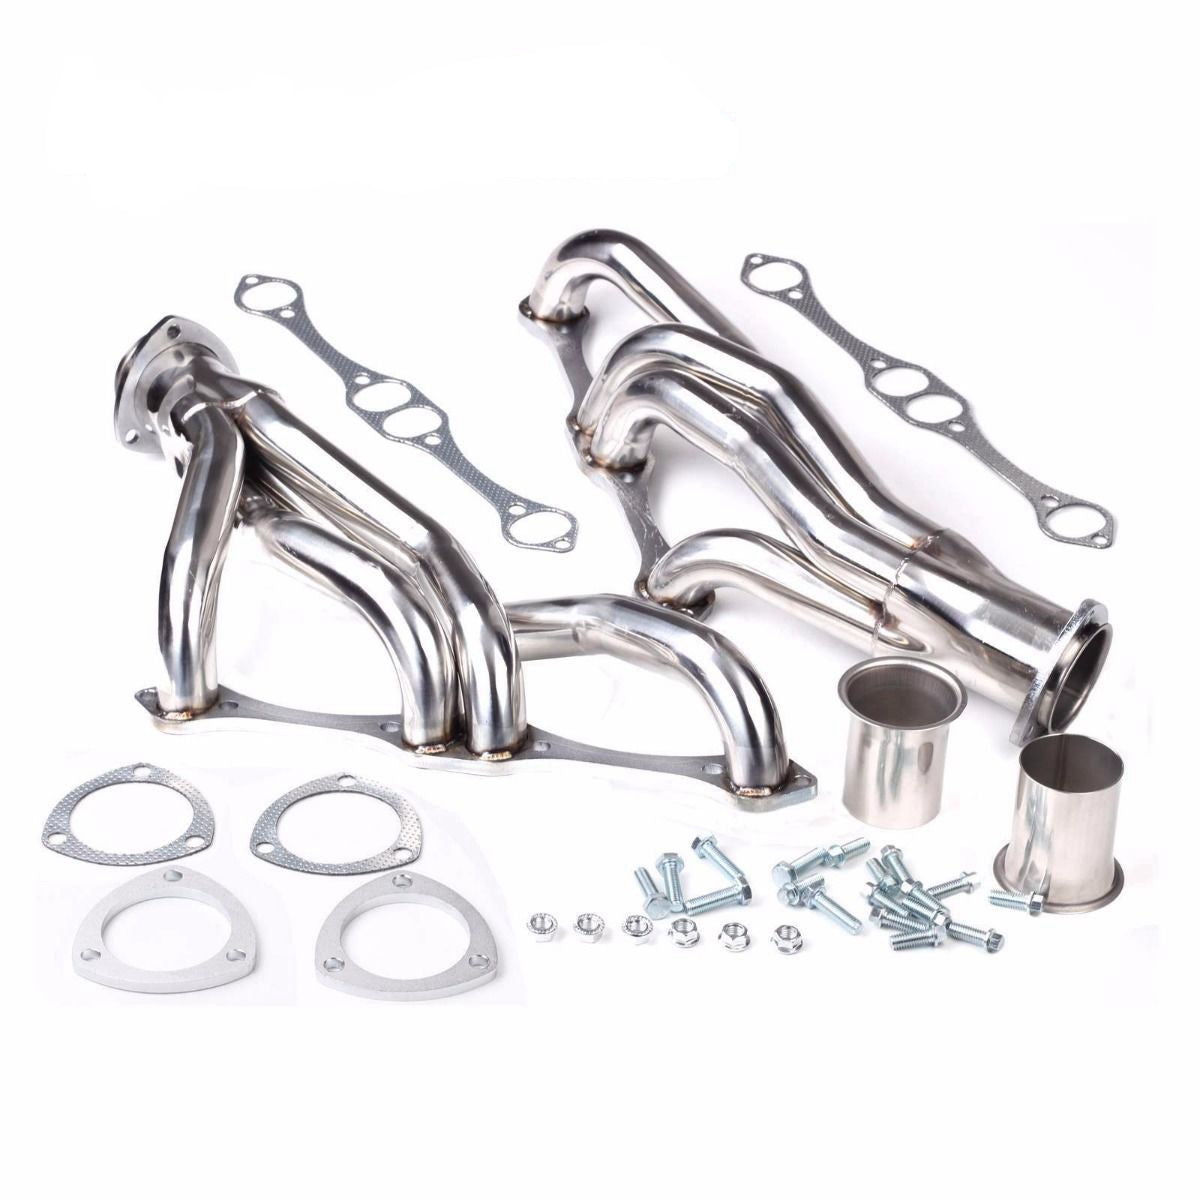 Exhaust Header for 1967-1987 Chevy All Small Block SB V8 262 265 283 305 327 350 400